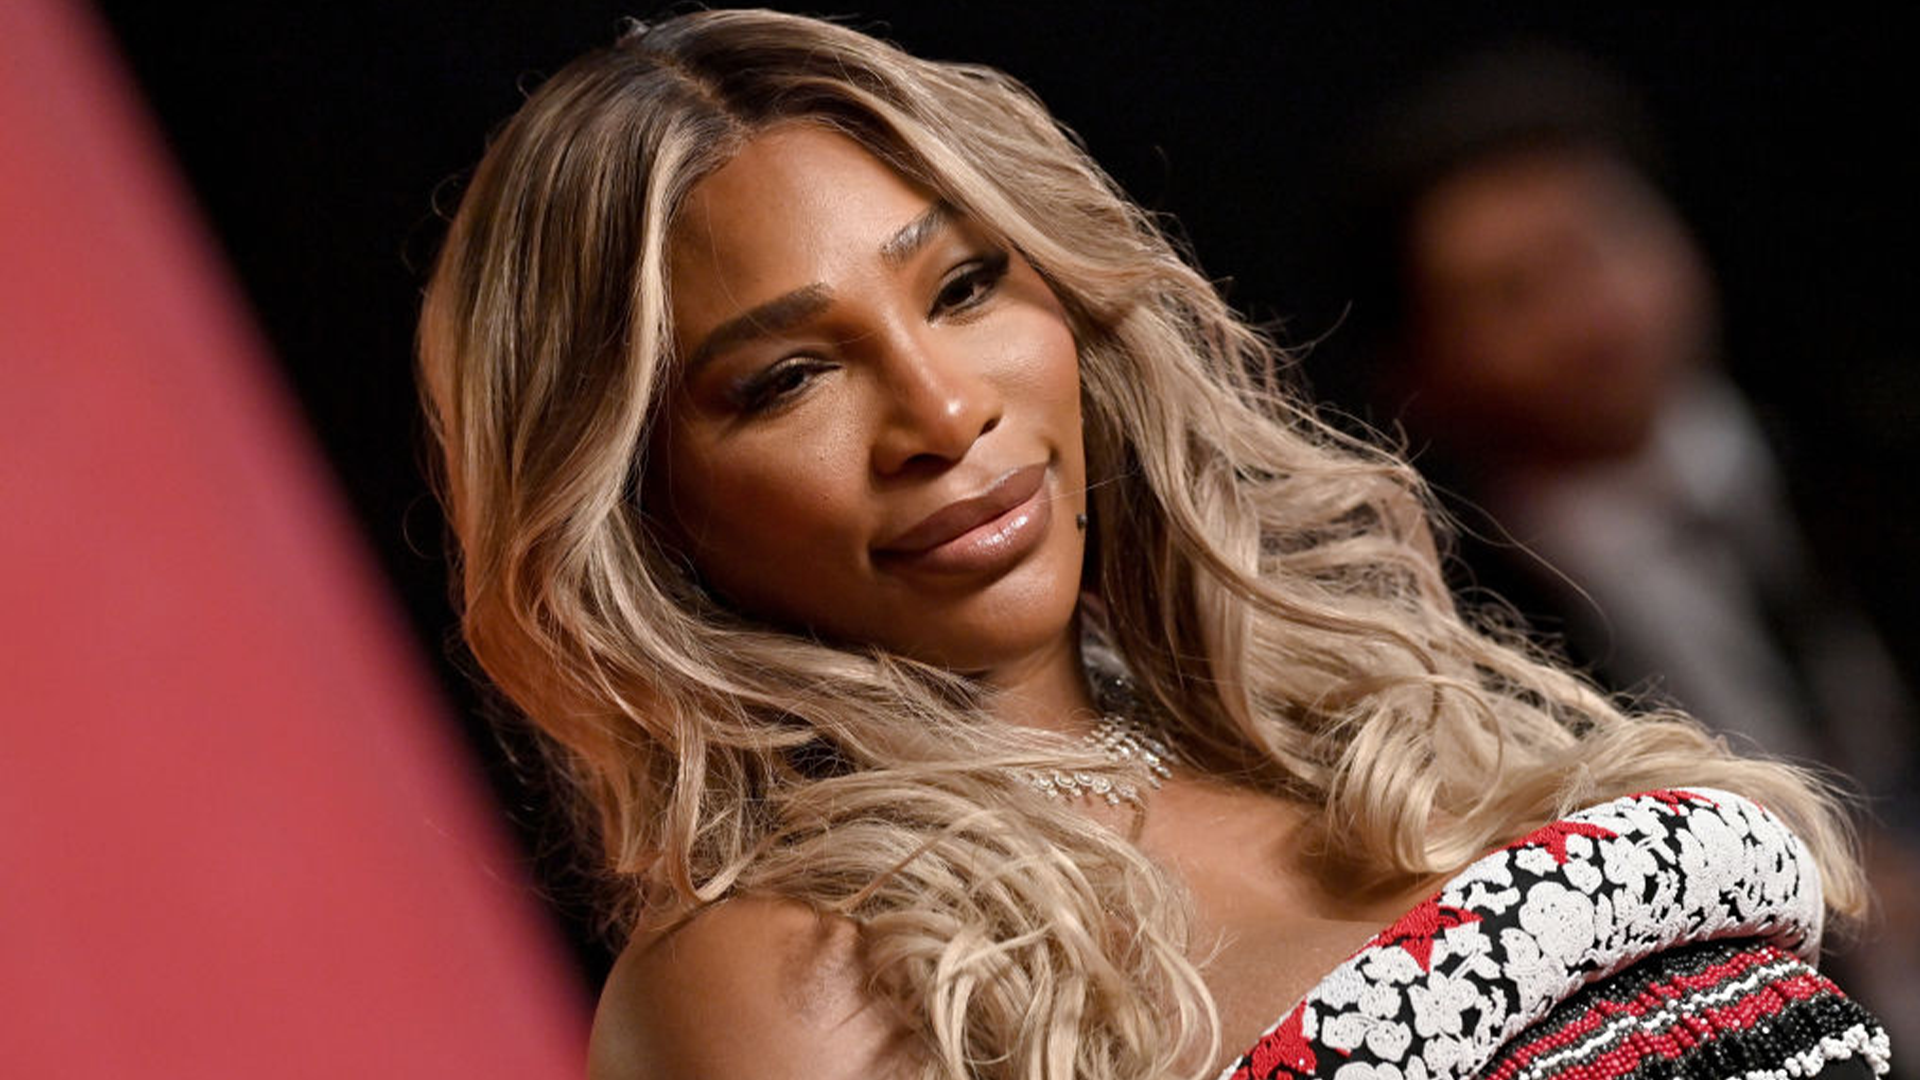 After Missing Out On Investing In Facebook, Airbnb, And Google, Serena Williams Went On To Invest In 16 Billion-Dollar Companies